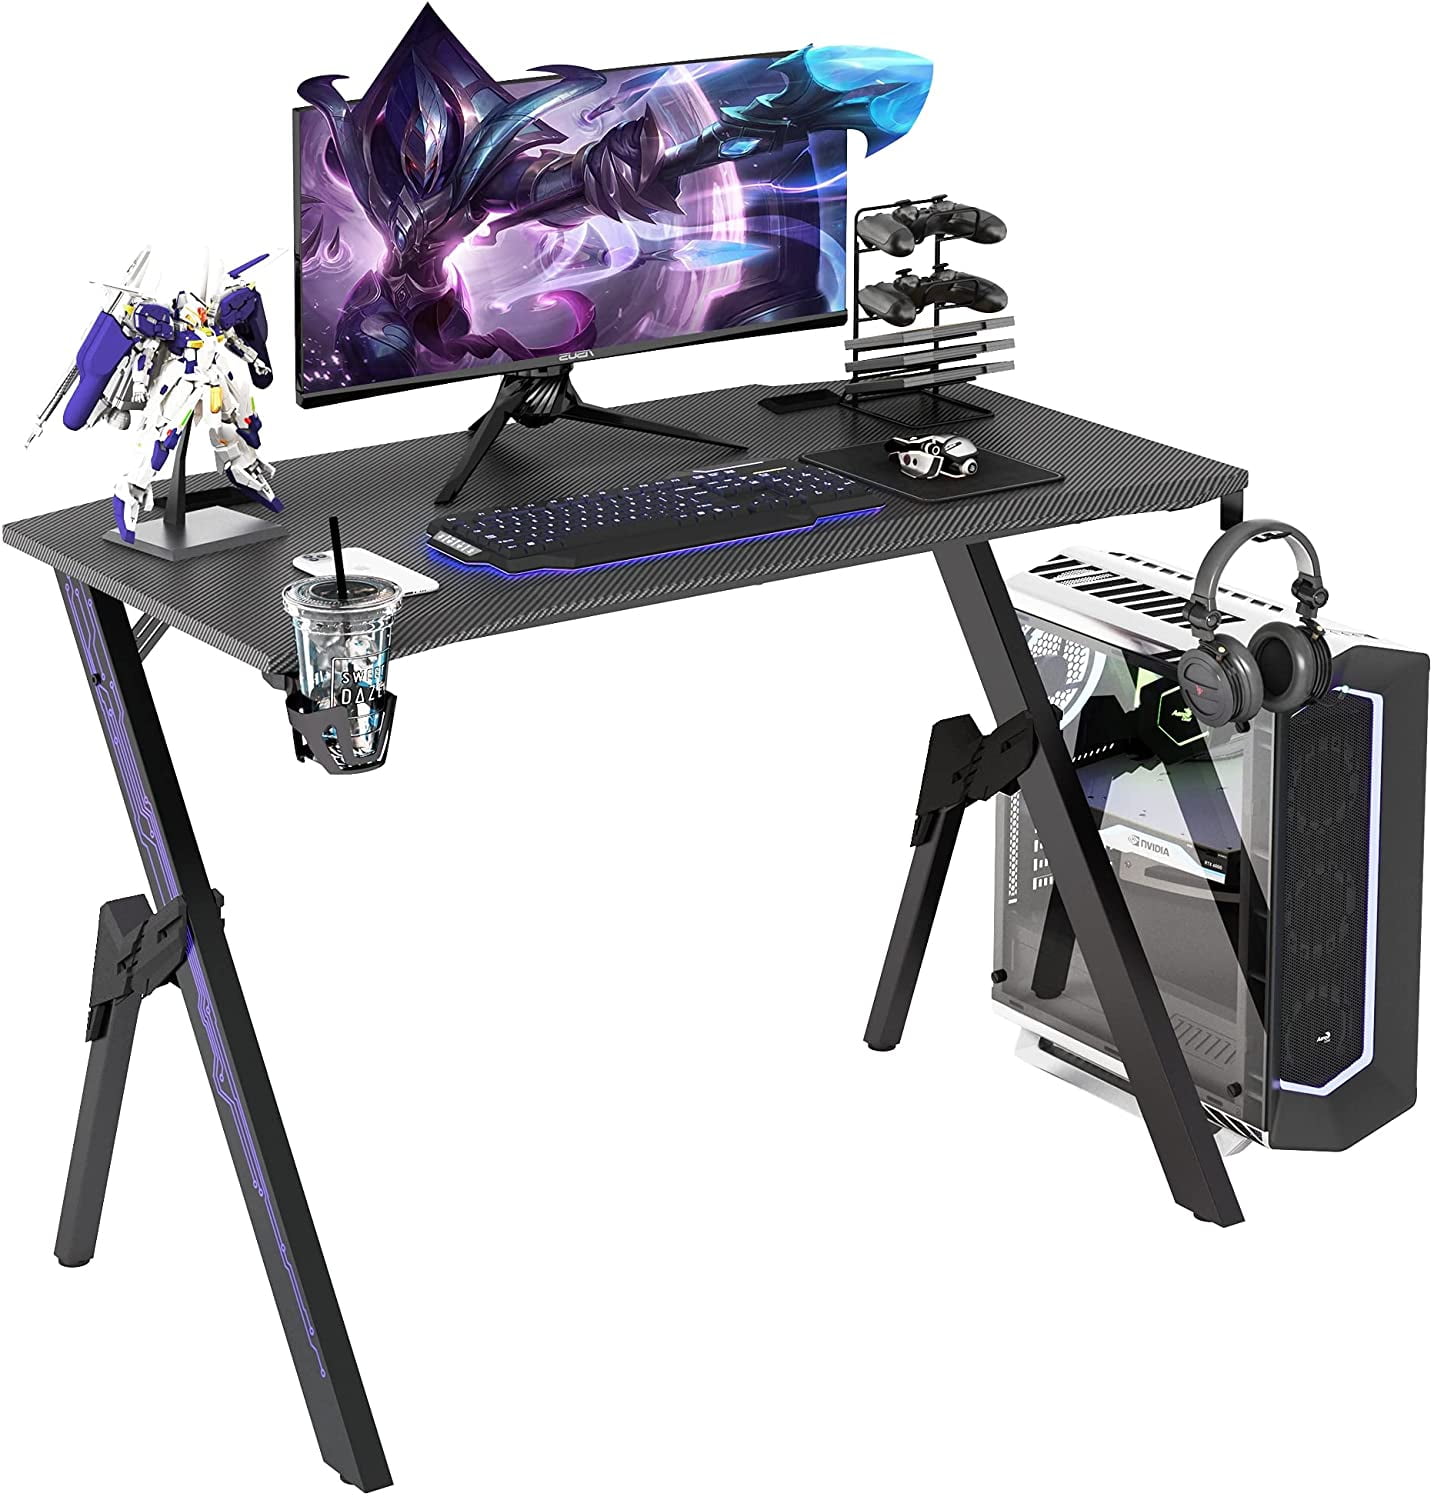 Galaxhero Gaming Desk Black Gamer Table With Cable 43.3" Gaming Computer Desk